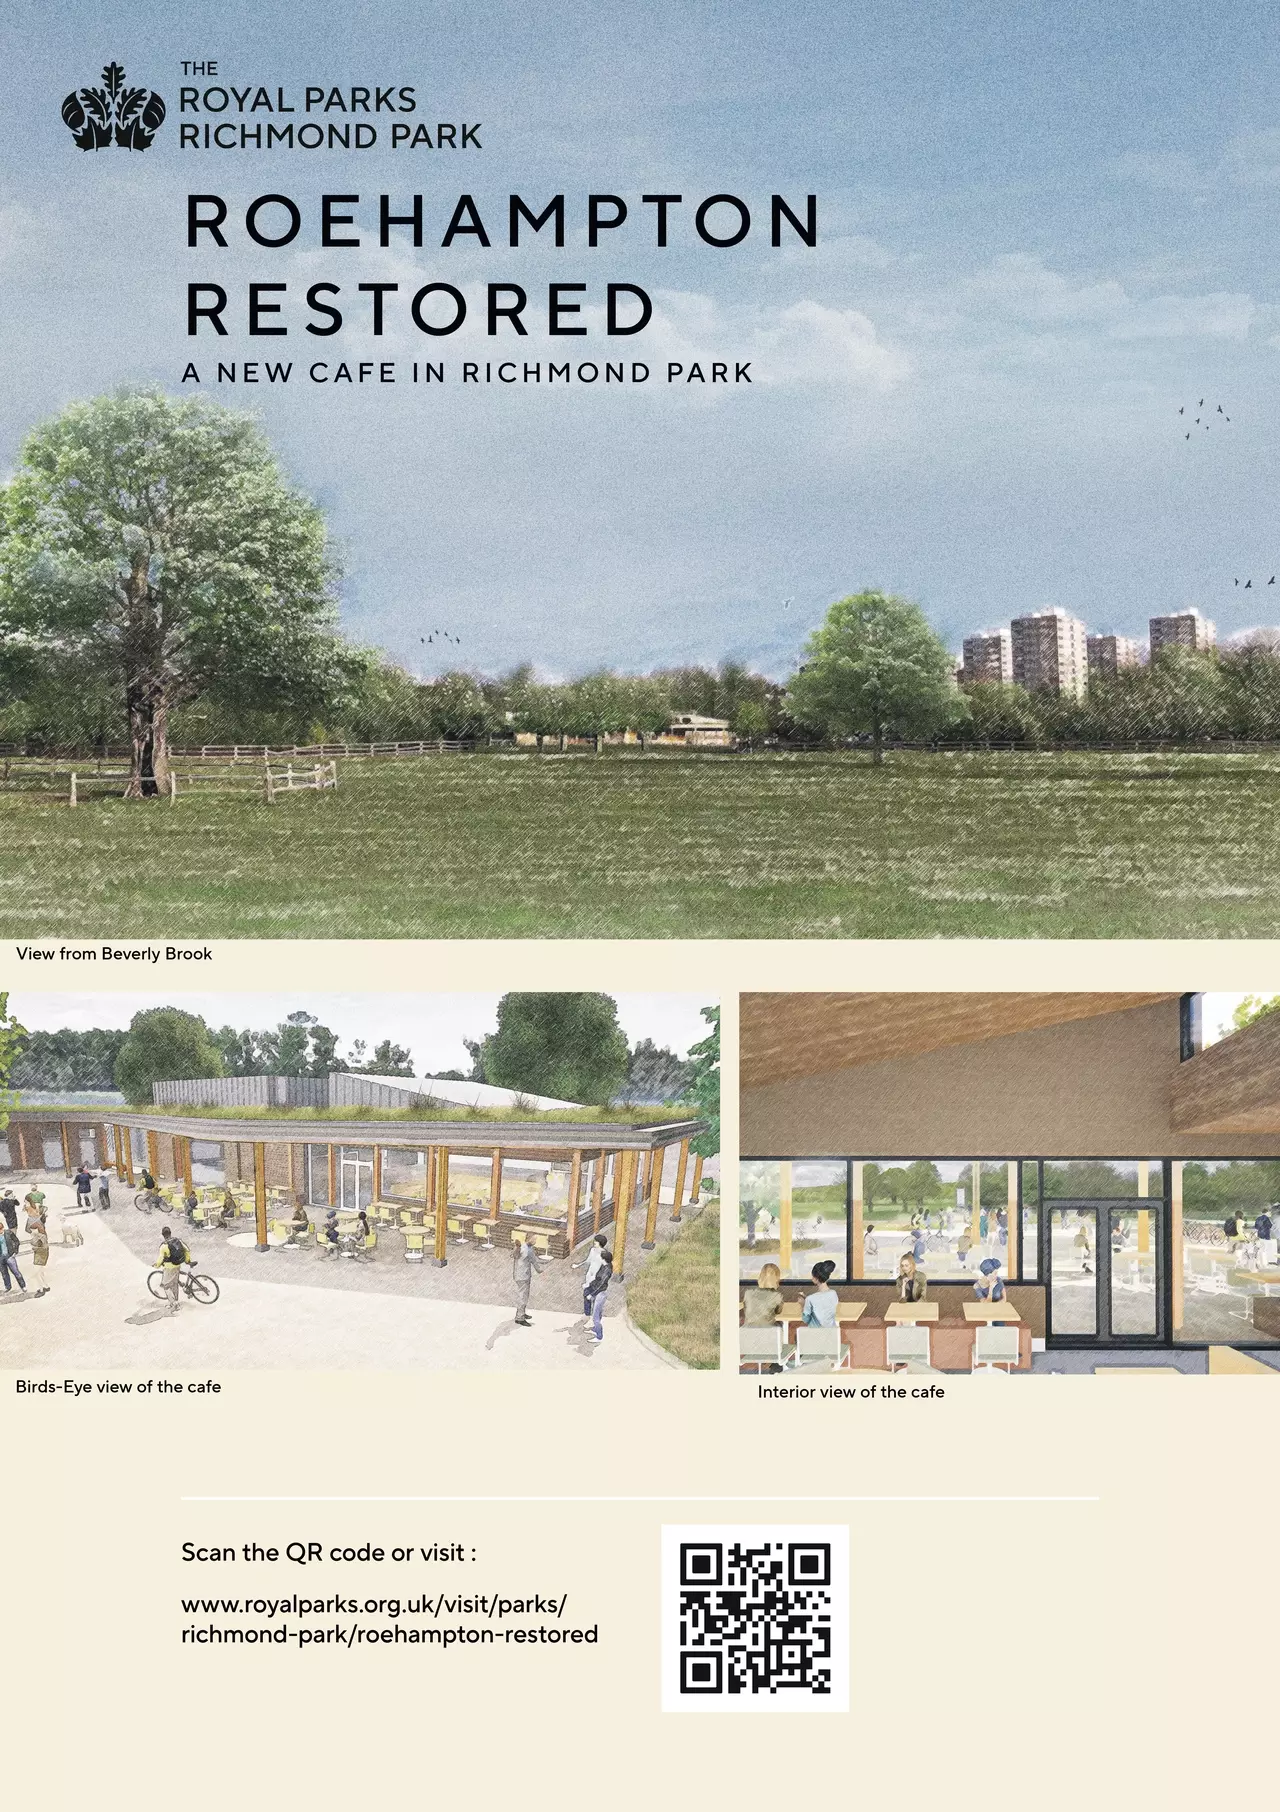 A poster showing artist interpretations of the new café proposed for Roehampton Gate